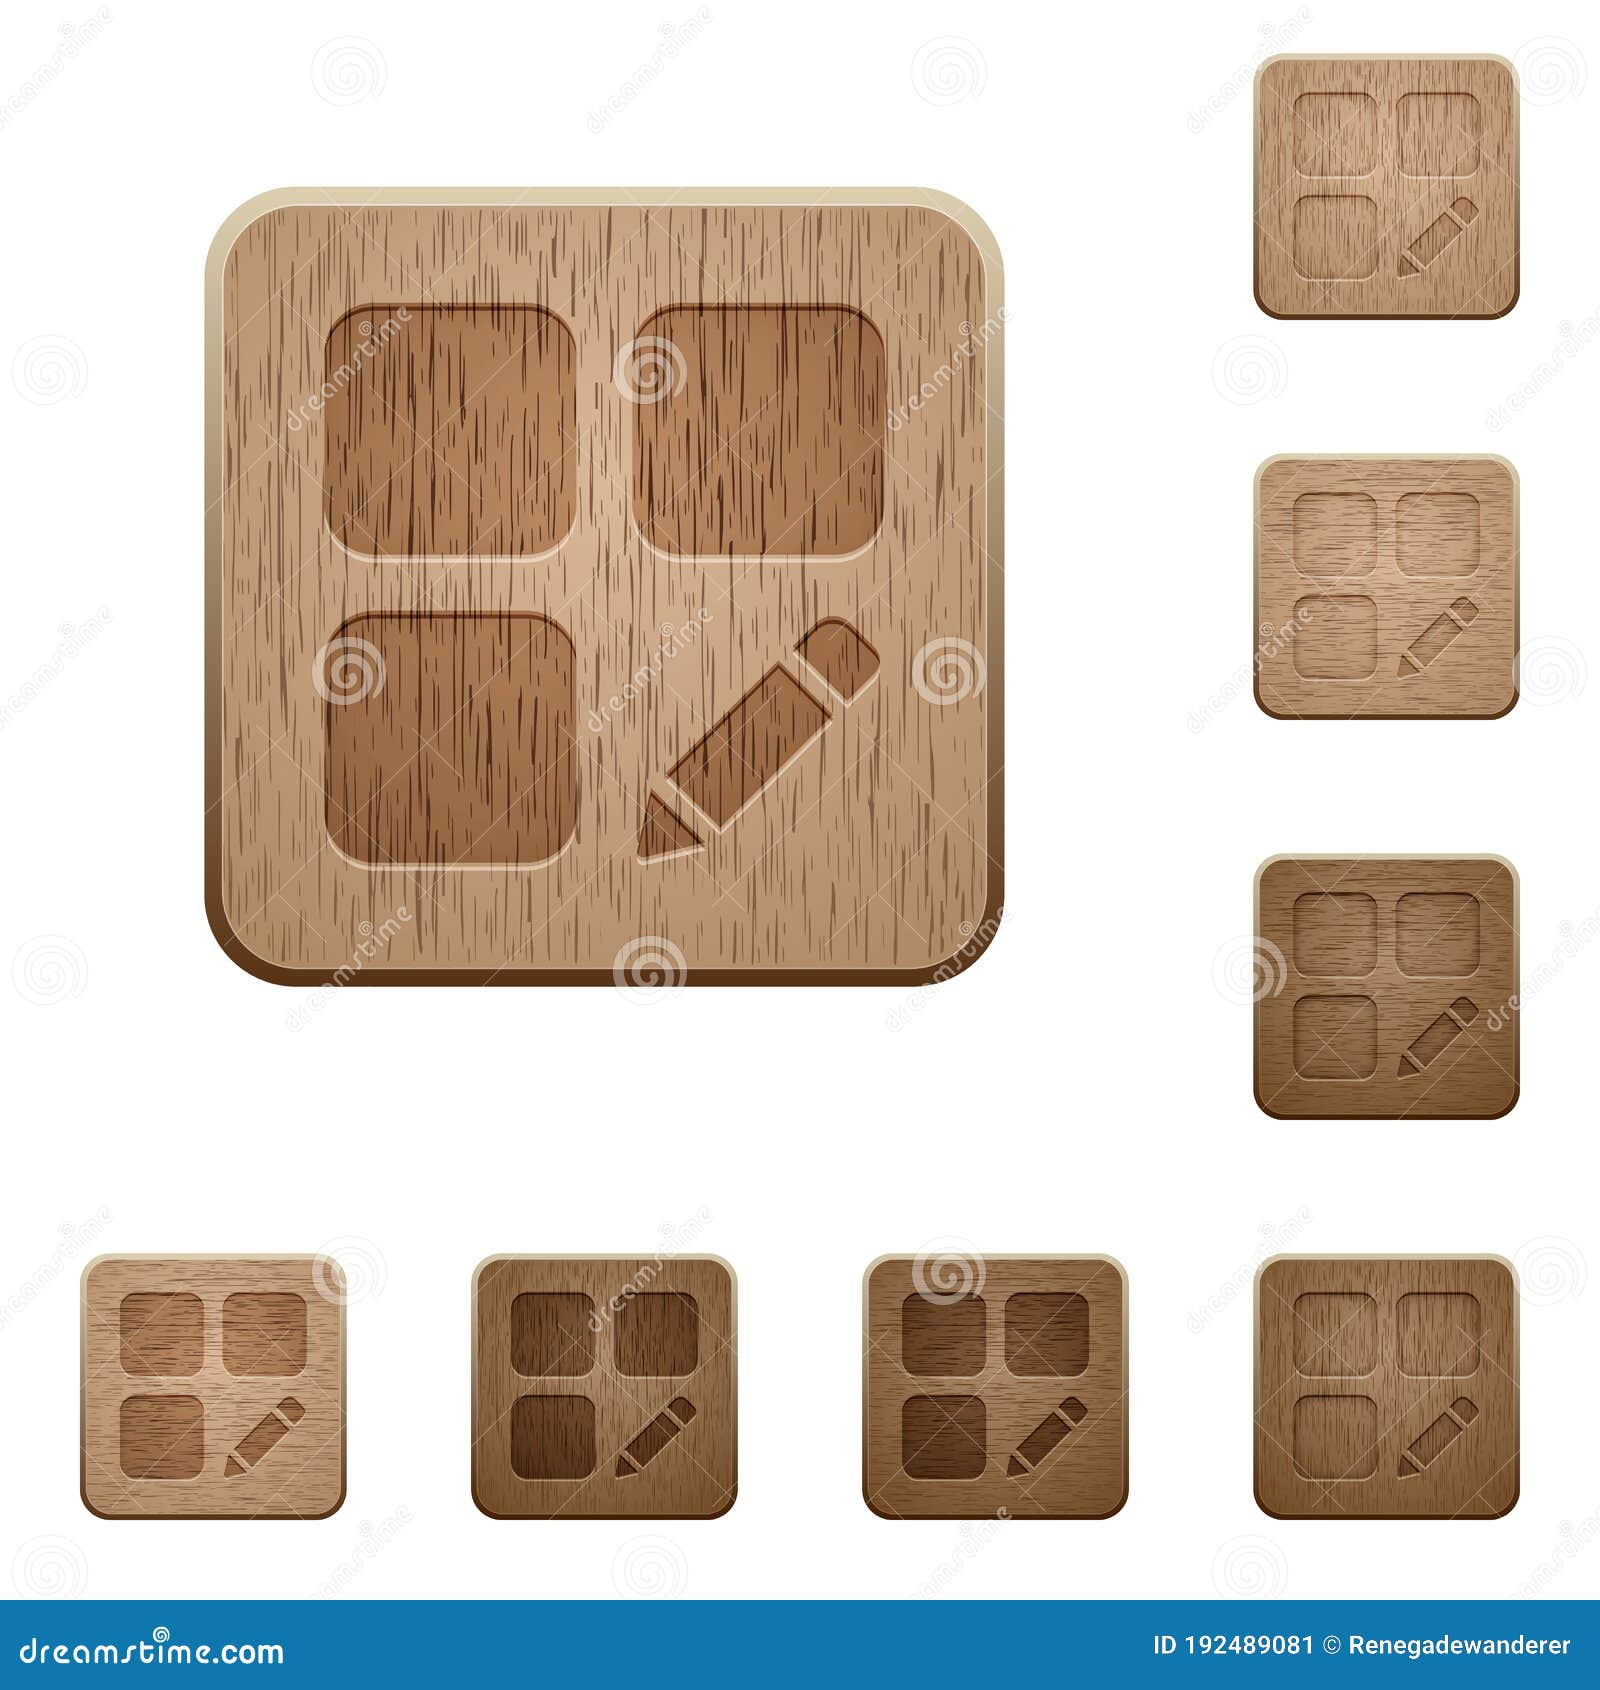 rename component wooden buttons